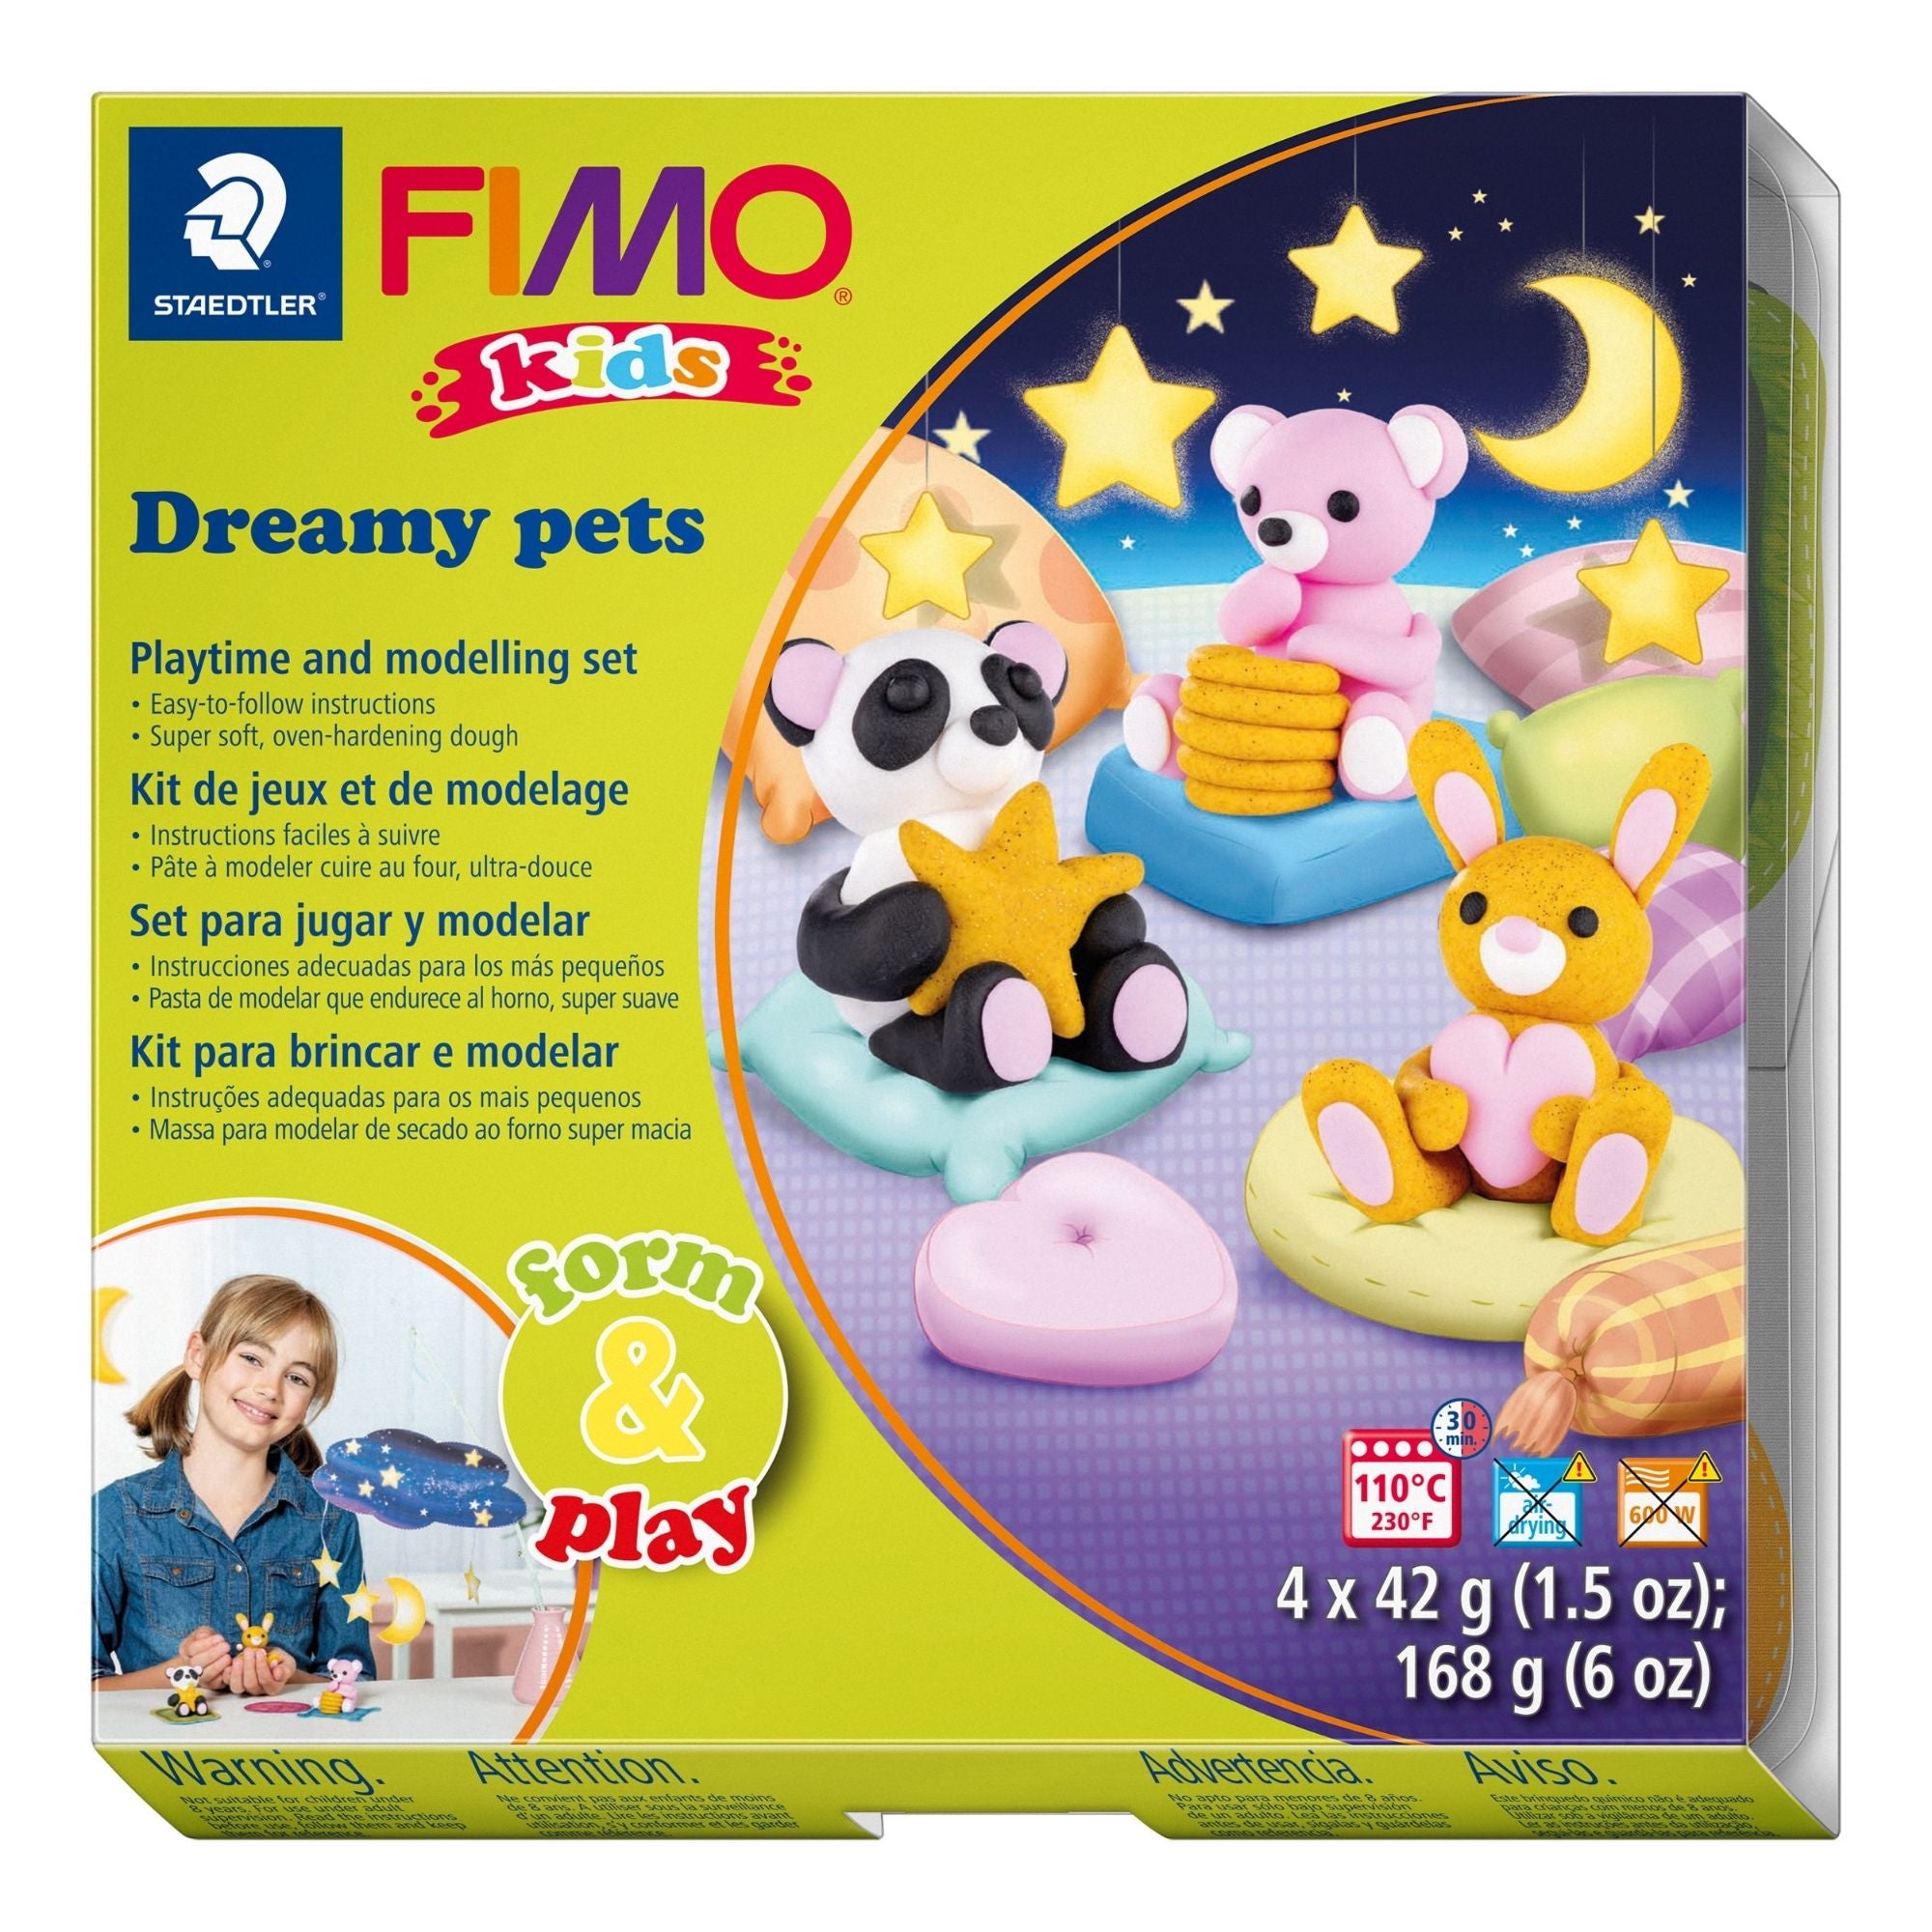 Staedtler FIMO Kids Clay Modelling Set - Dreamy Pets Box